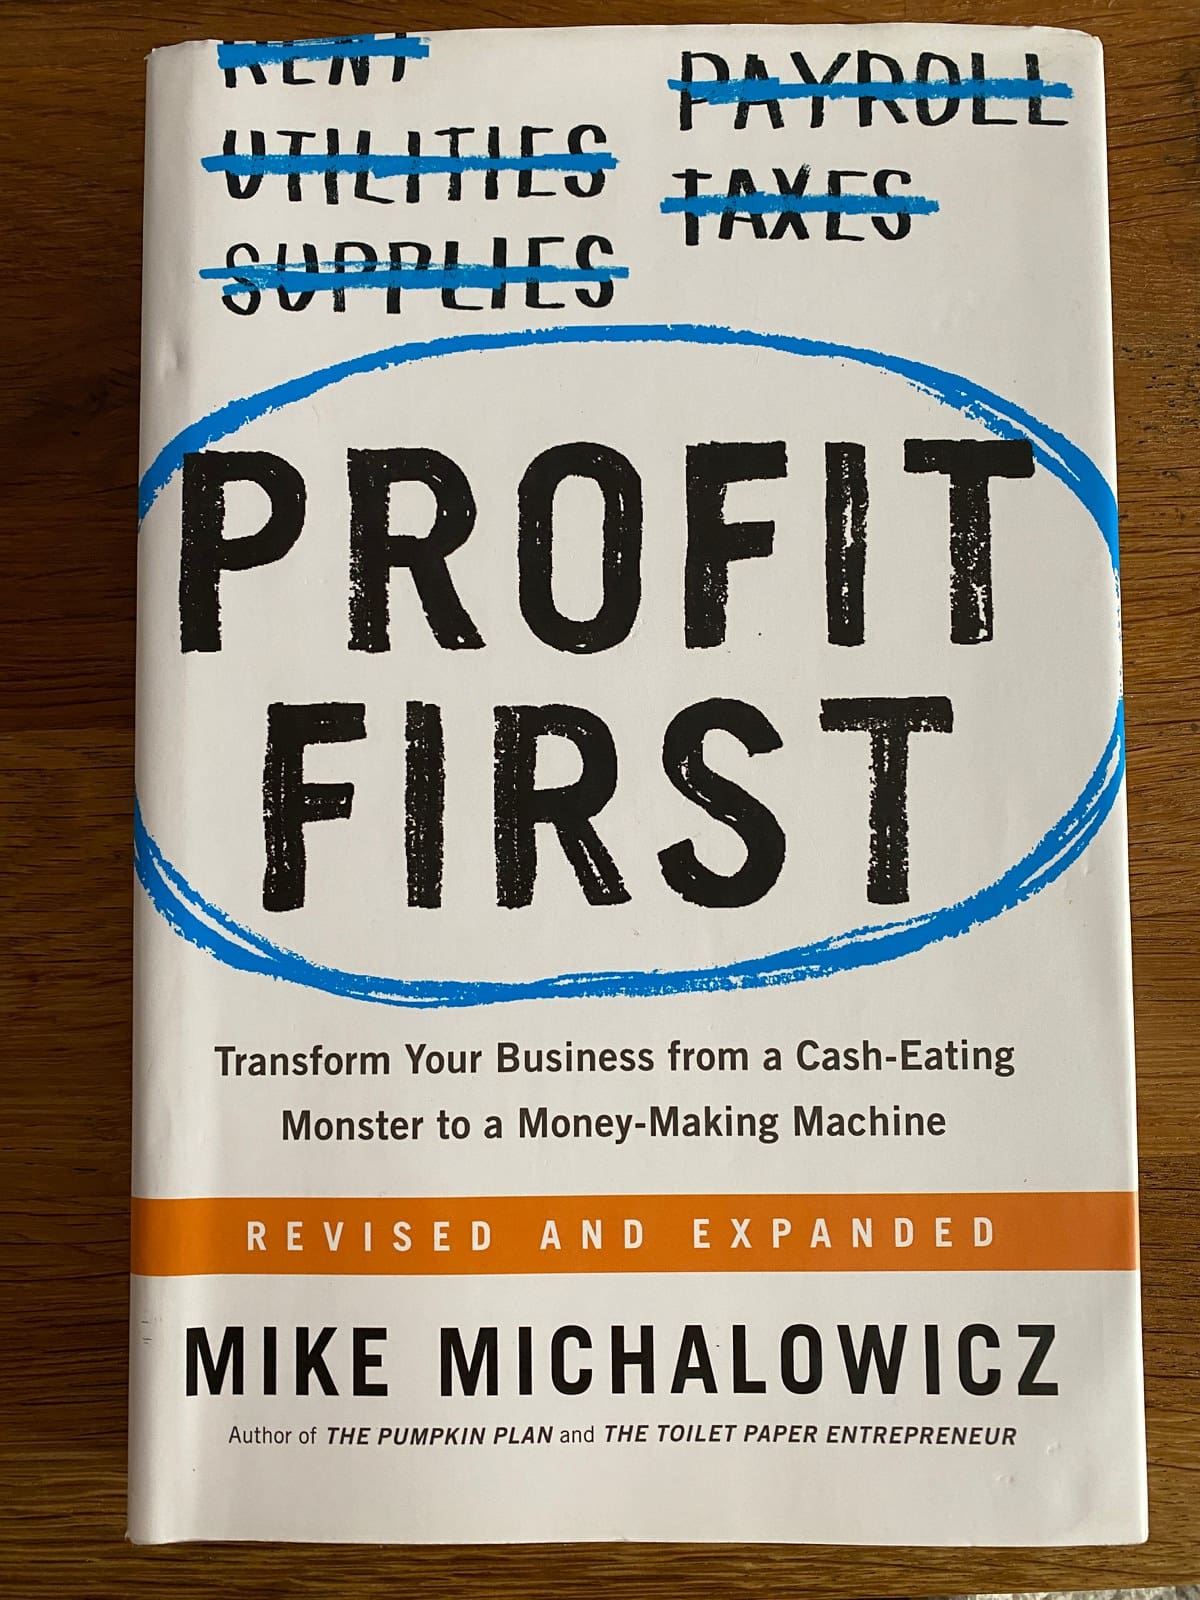 Profit First is an essential business book for photographers looking to be financial secure